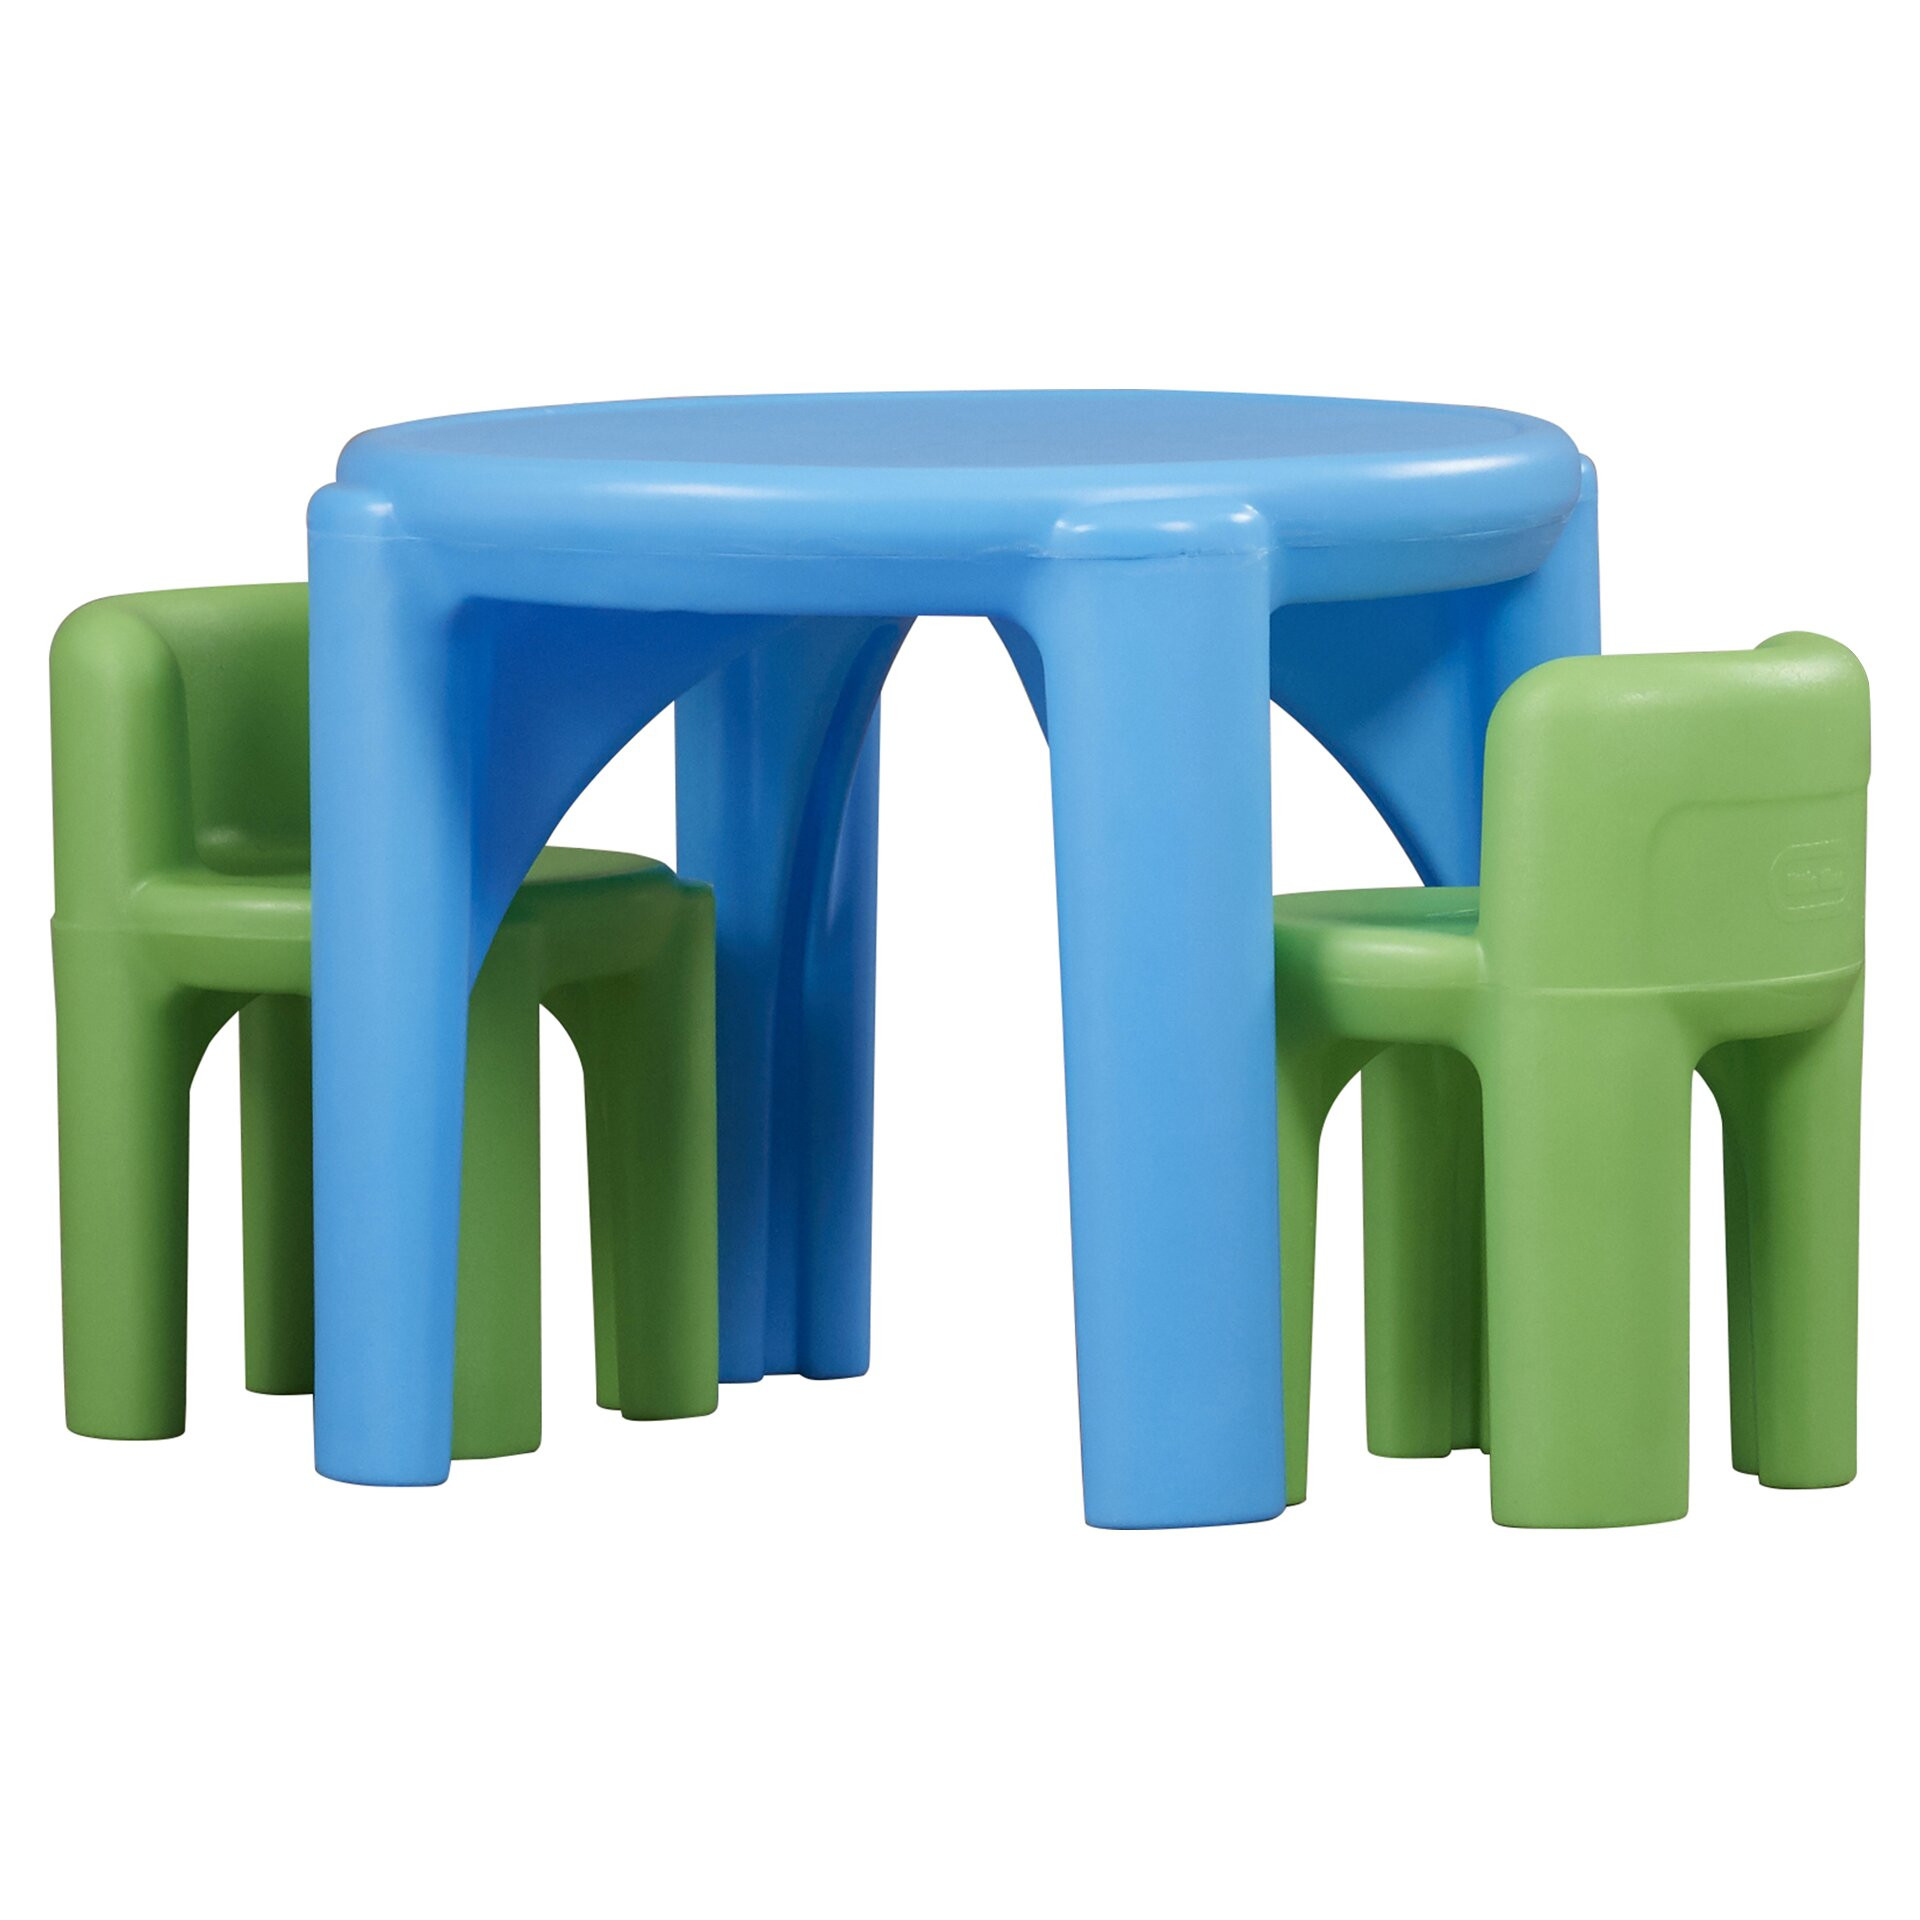 Little Kids Table And Chairs
 Little Tikes Kids 3 Piece Table & Chair Set & Reviews